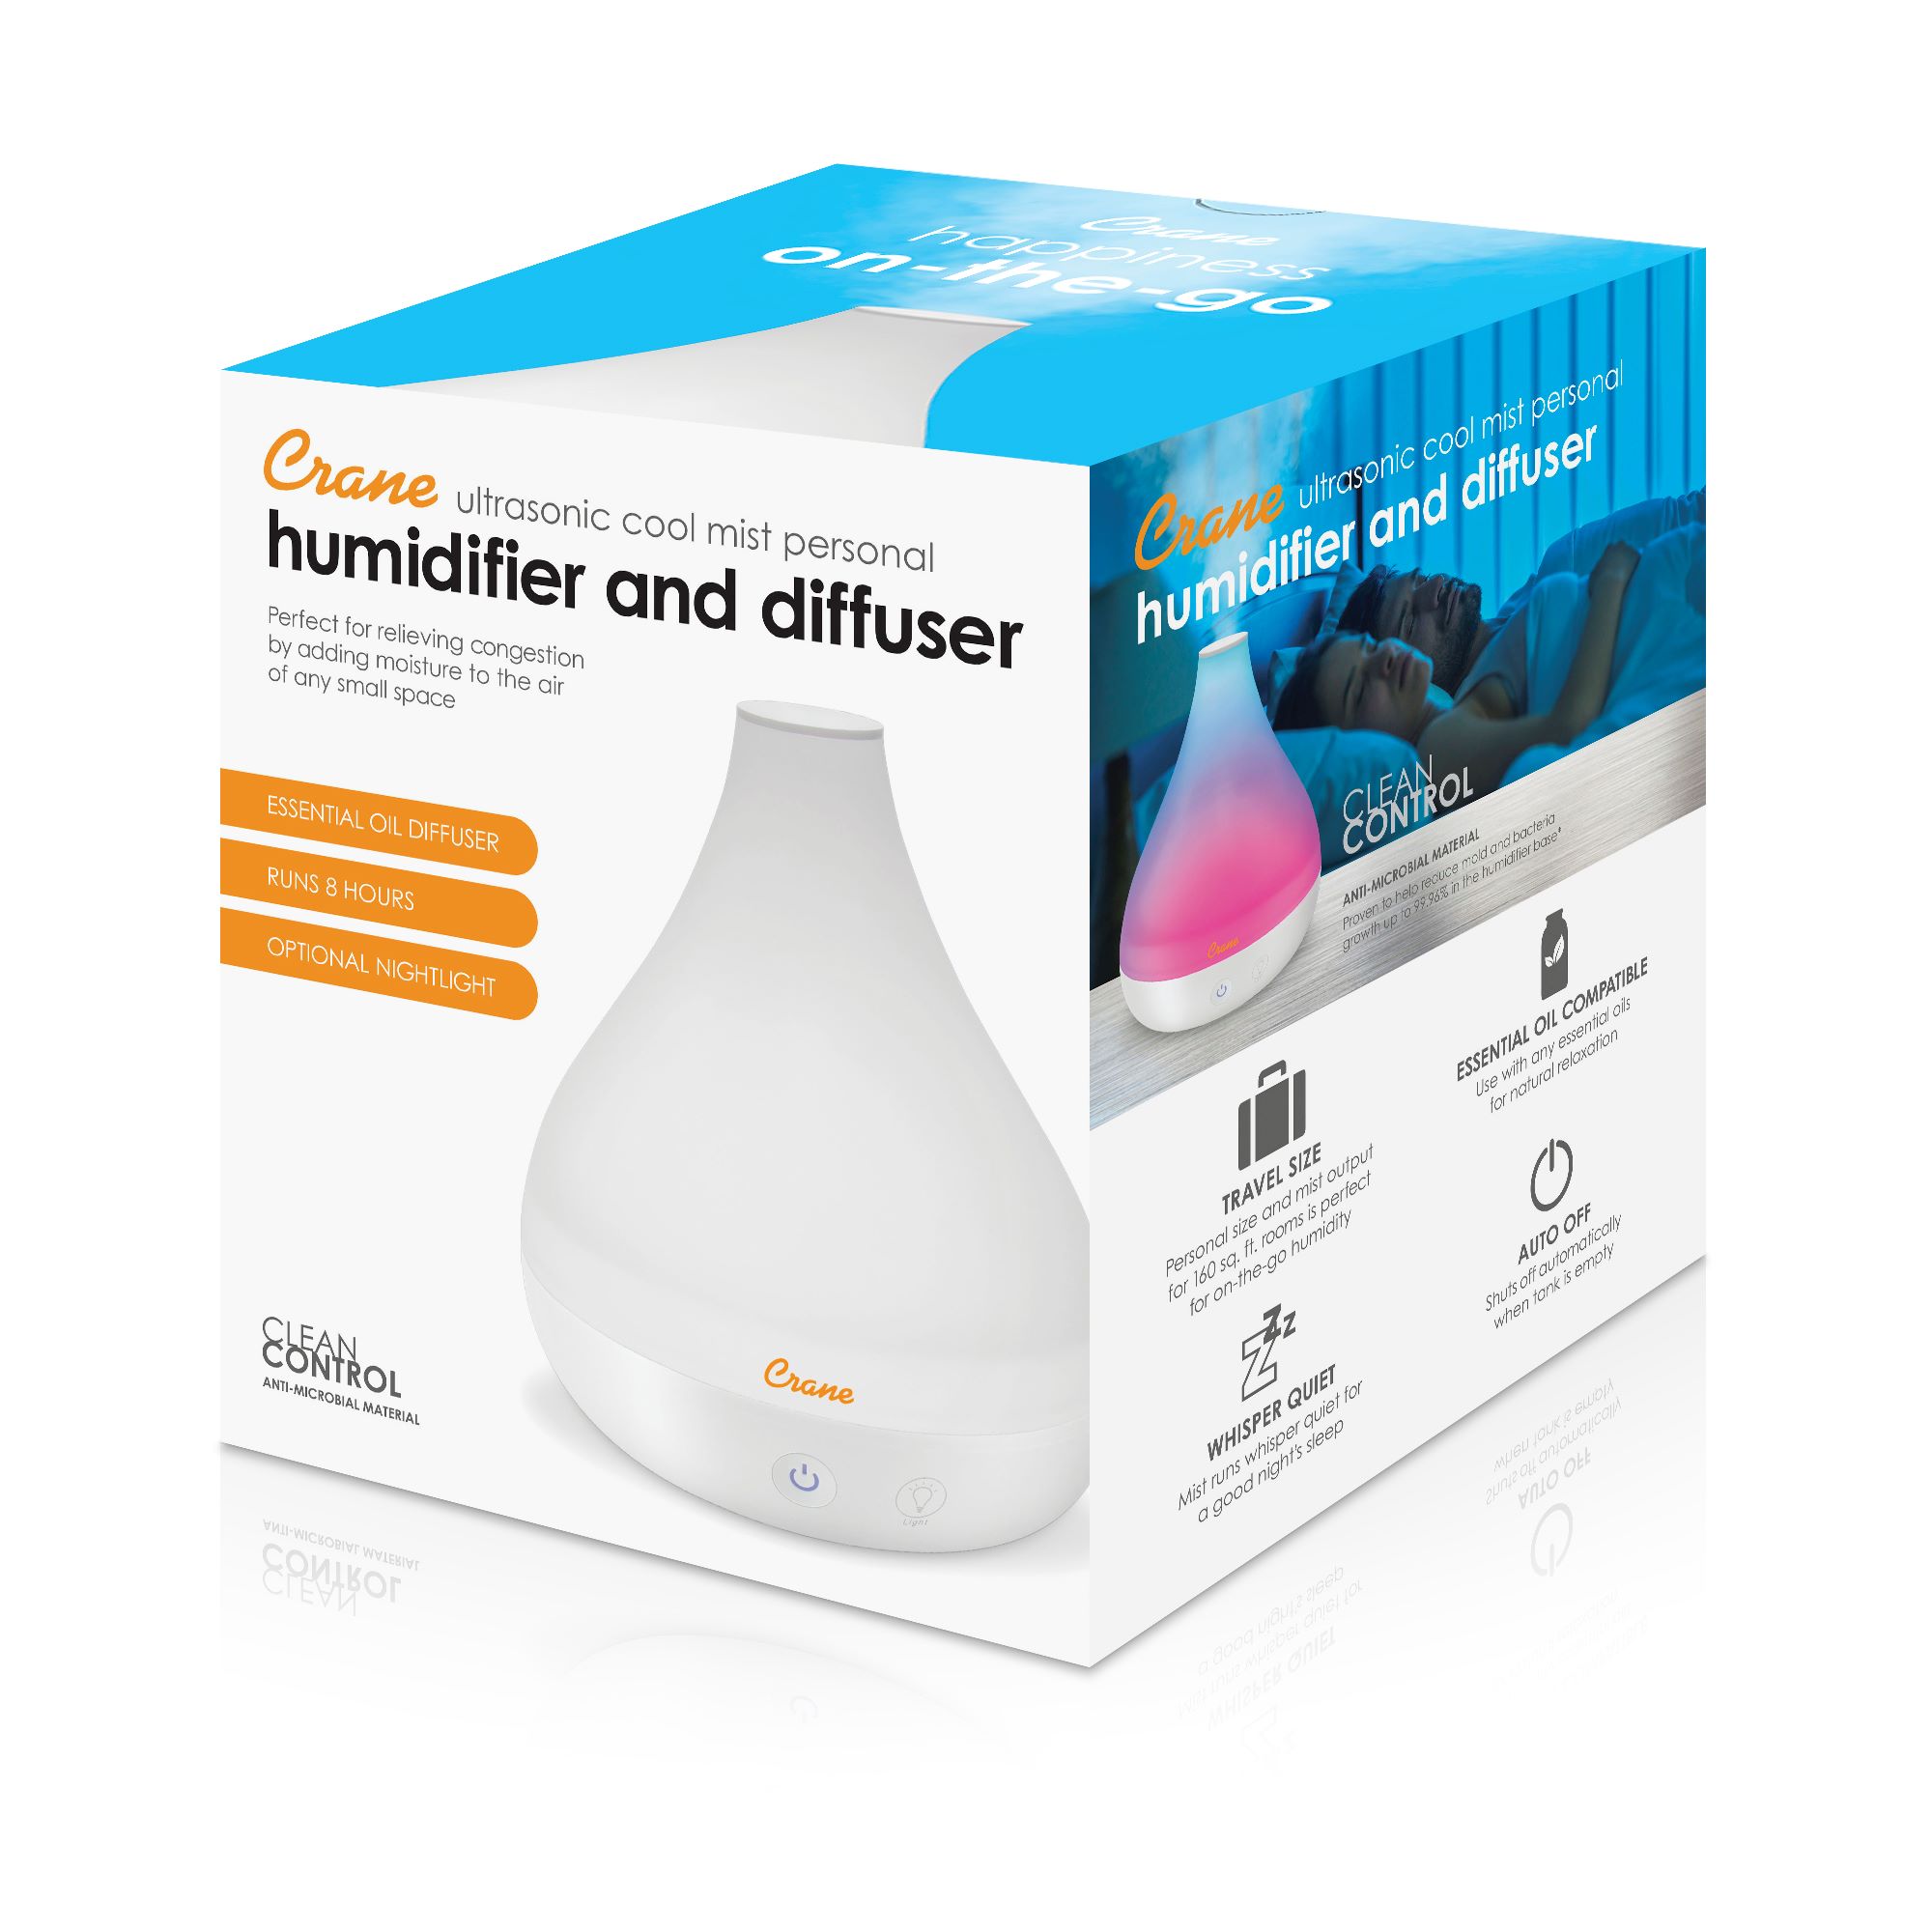 Ambar Perfums 10040083 Humidifier, Aroma Diffuser, White, One Size